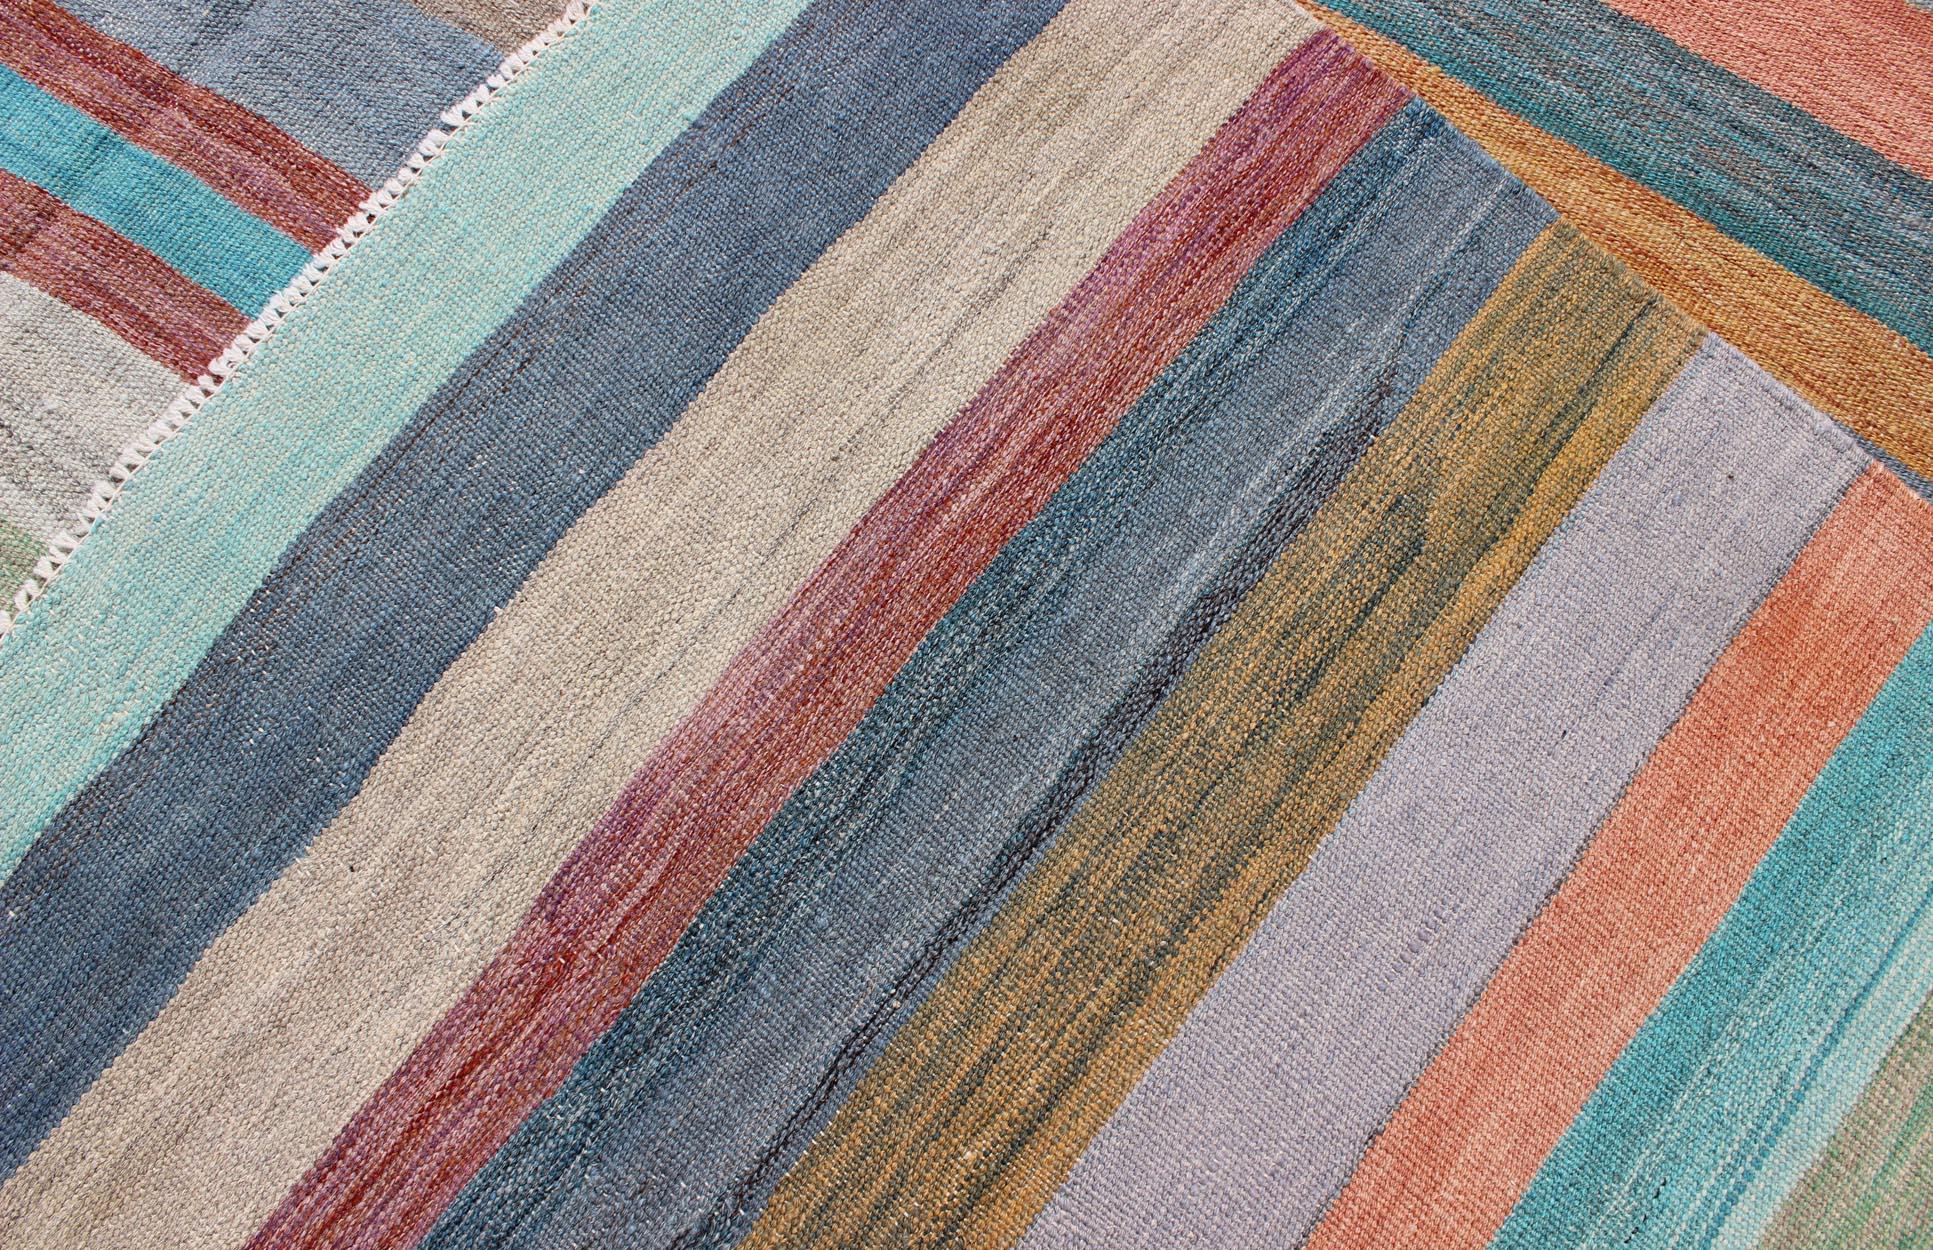 Colorful Flat-Weave Modern Kilim Rug with Classic Stripes for Modern Interiors 5